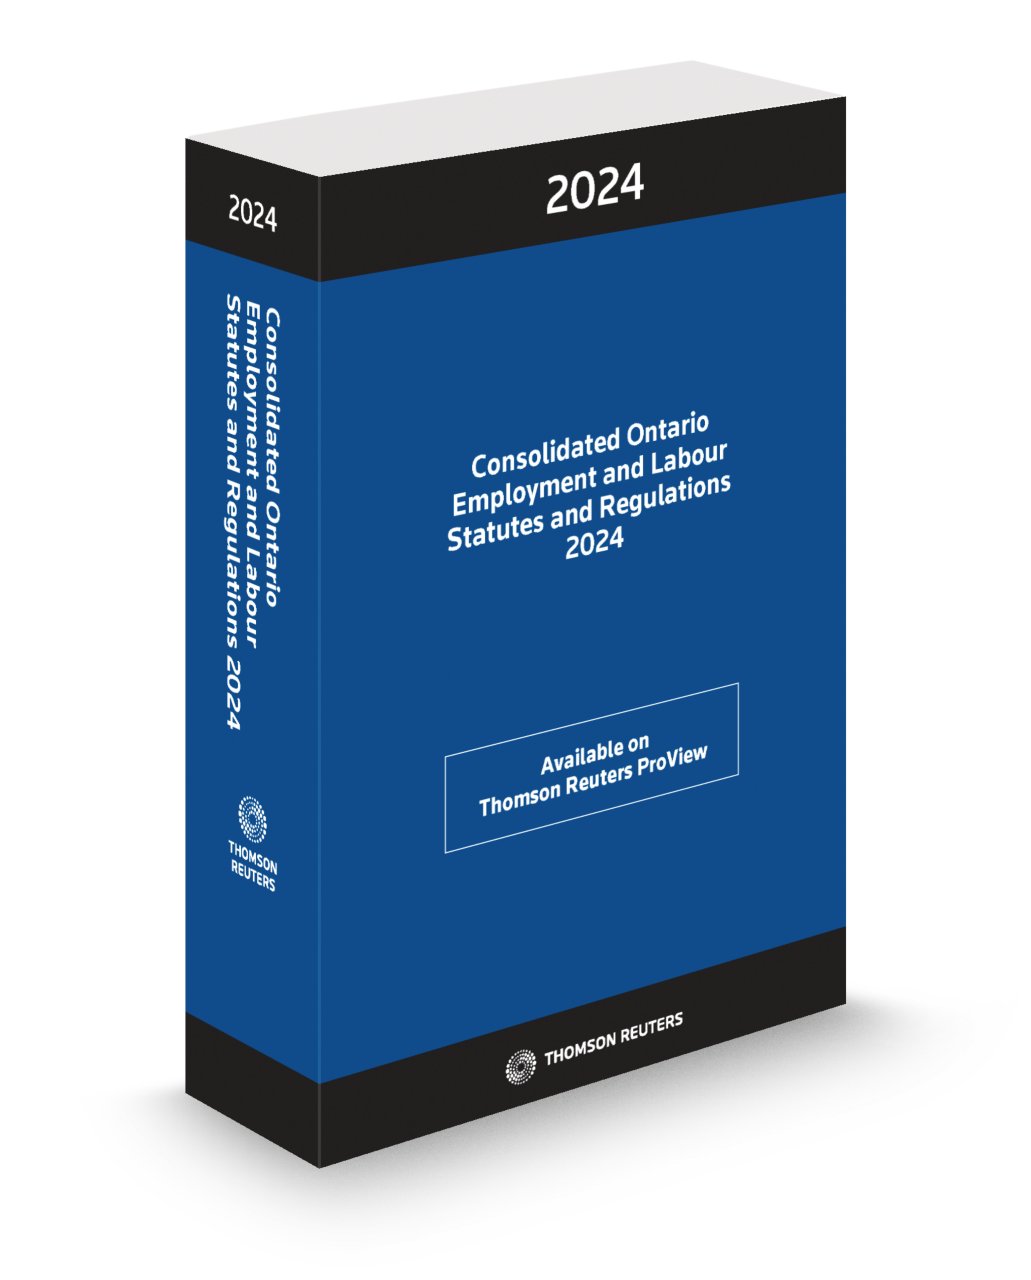 Front cover image of the Consolidated Ontario Employment and Labour Statutes and Regulations 2024.